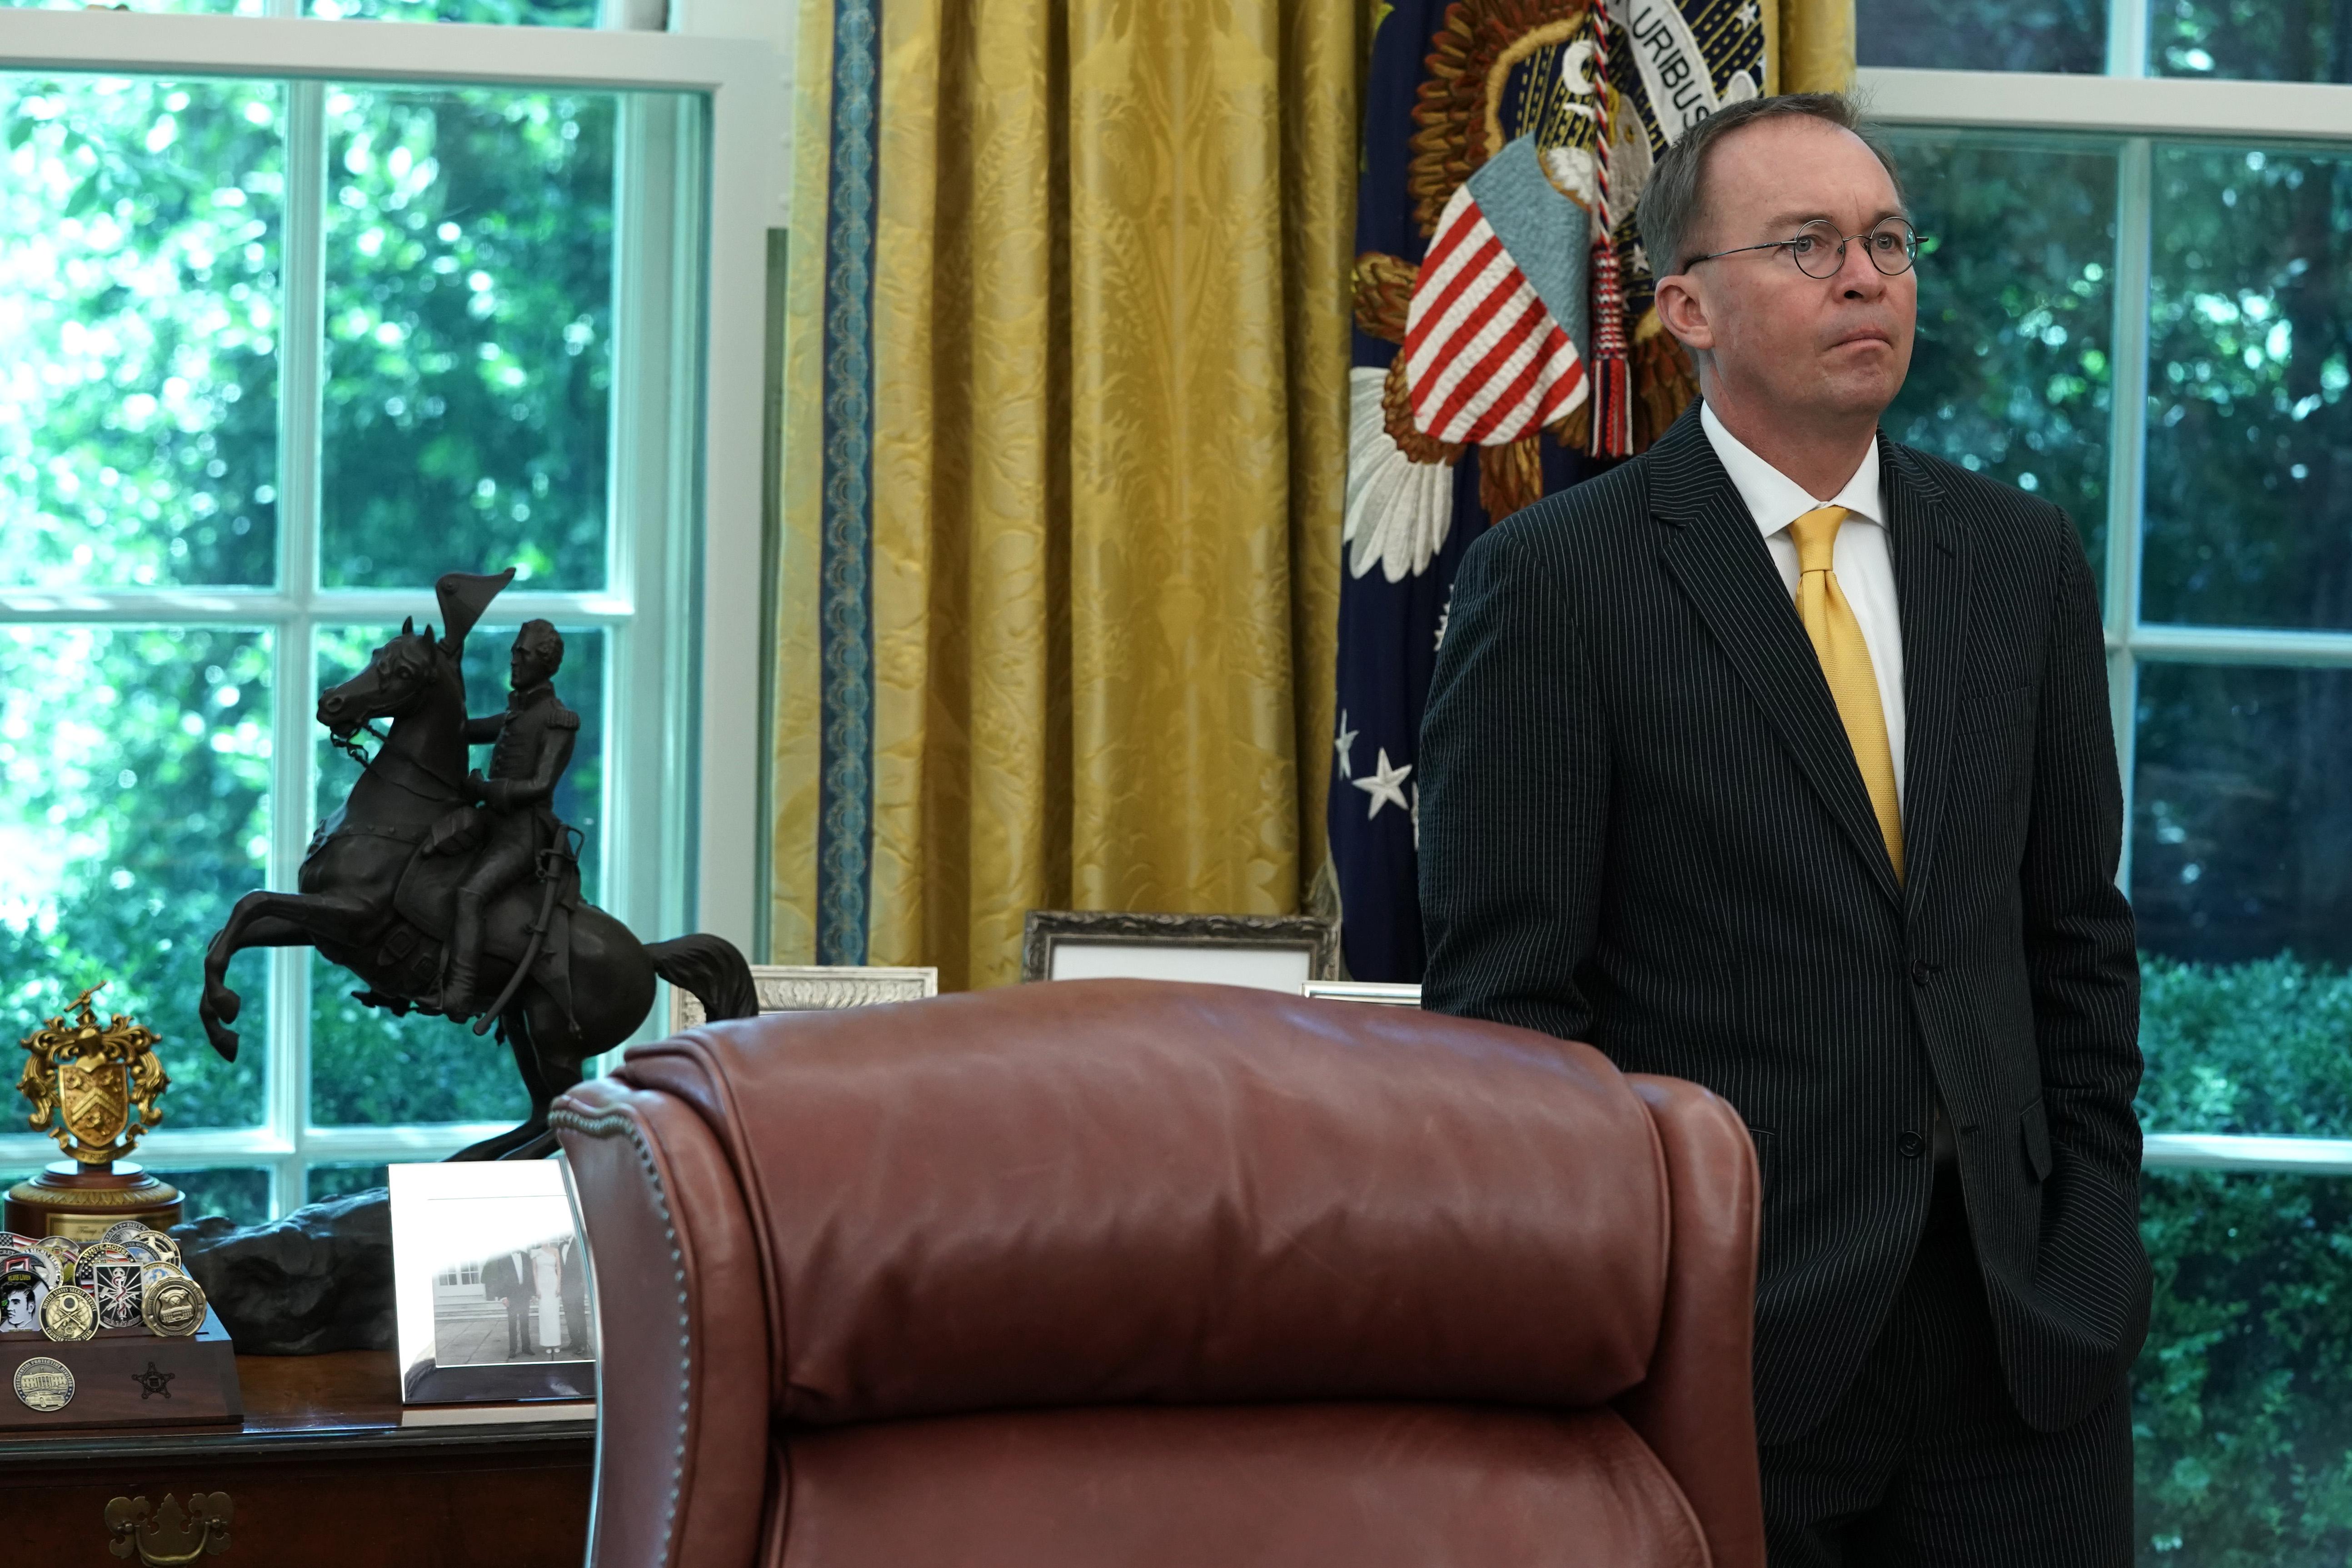 Mulvaney standing next to the president's chair.